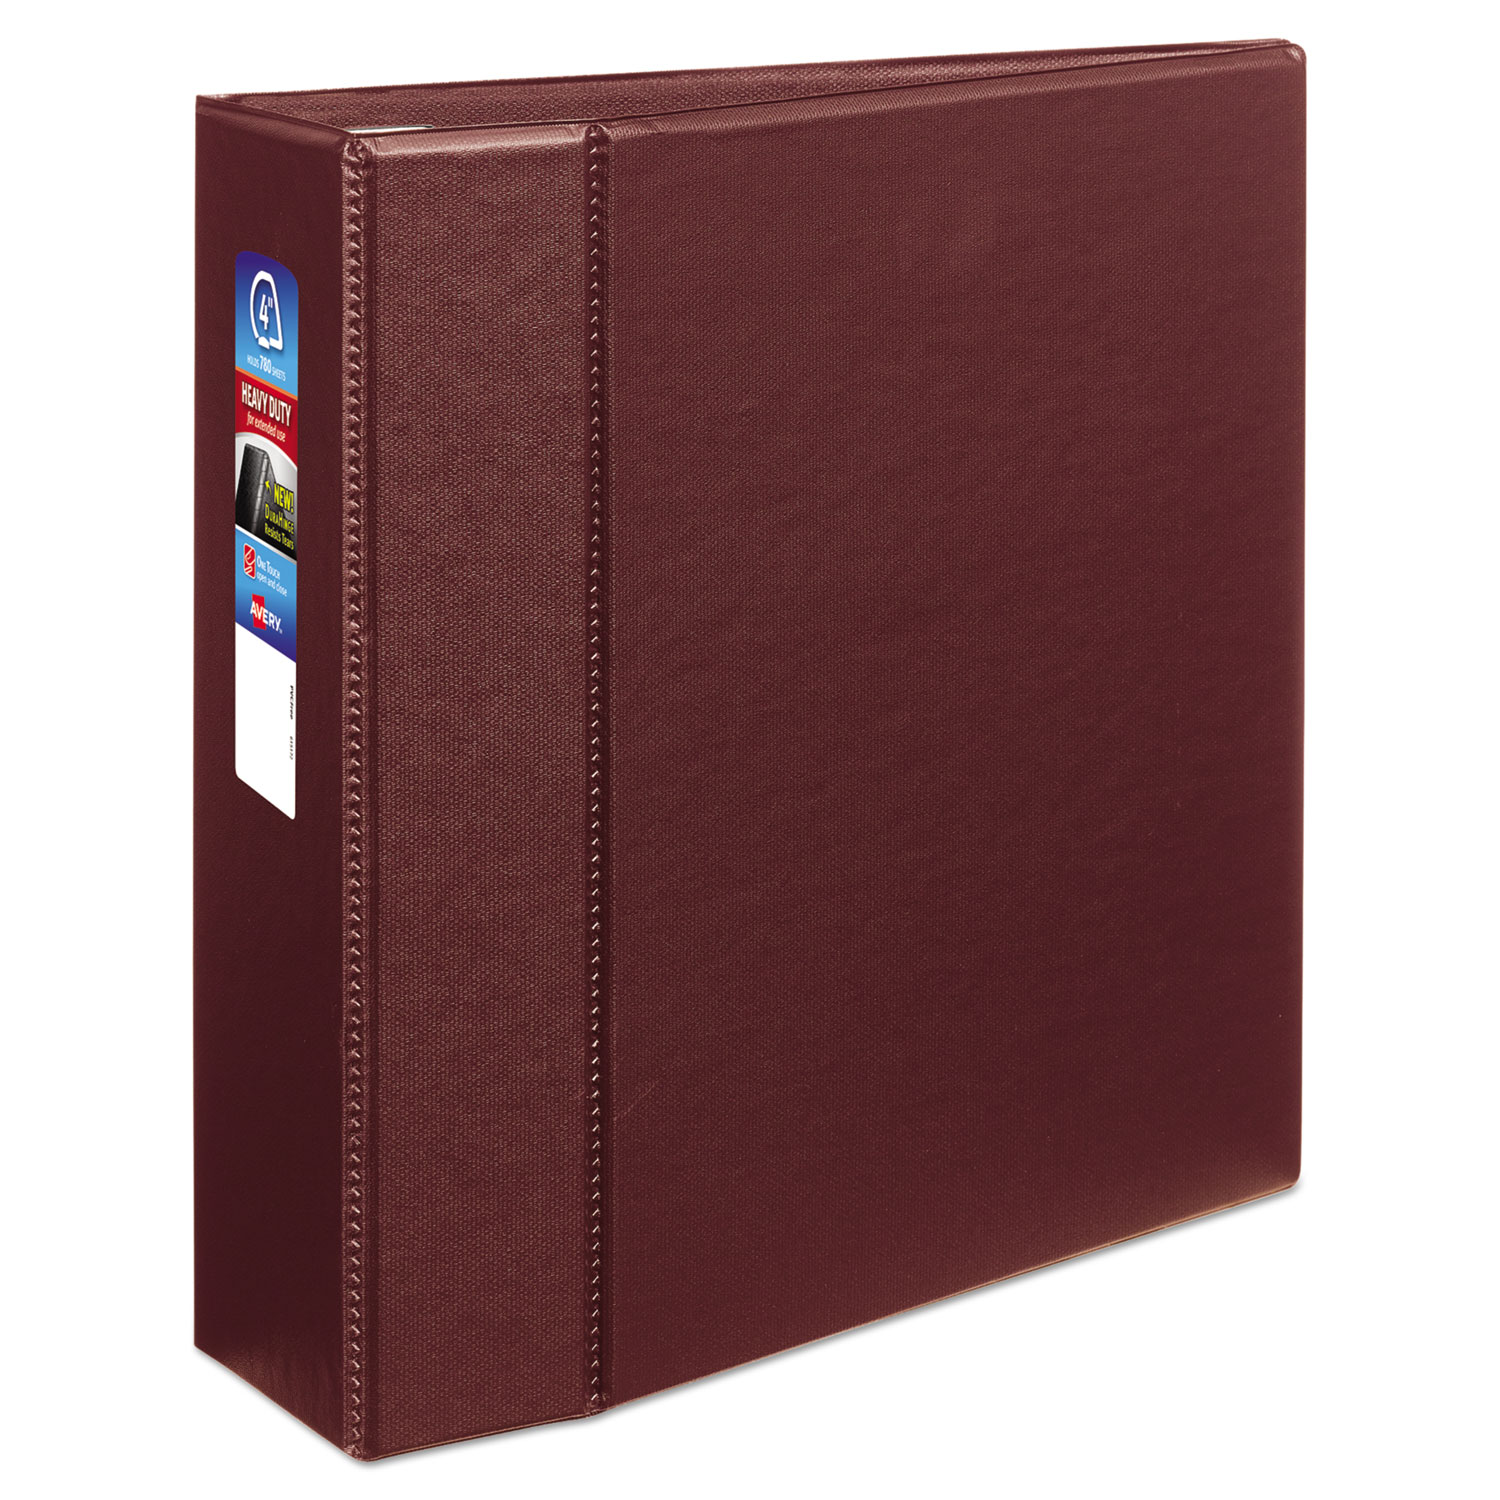 Heavy-Duty Non-View Binder with DuraHinge and Locking One Touch EZD Rings, 3 Rings, 4" Capacity, 11 x 8.5, Maroon